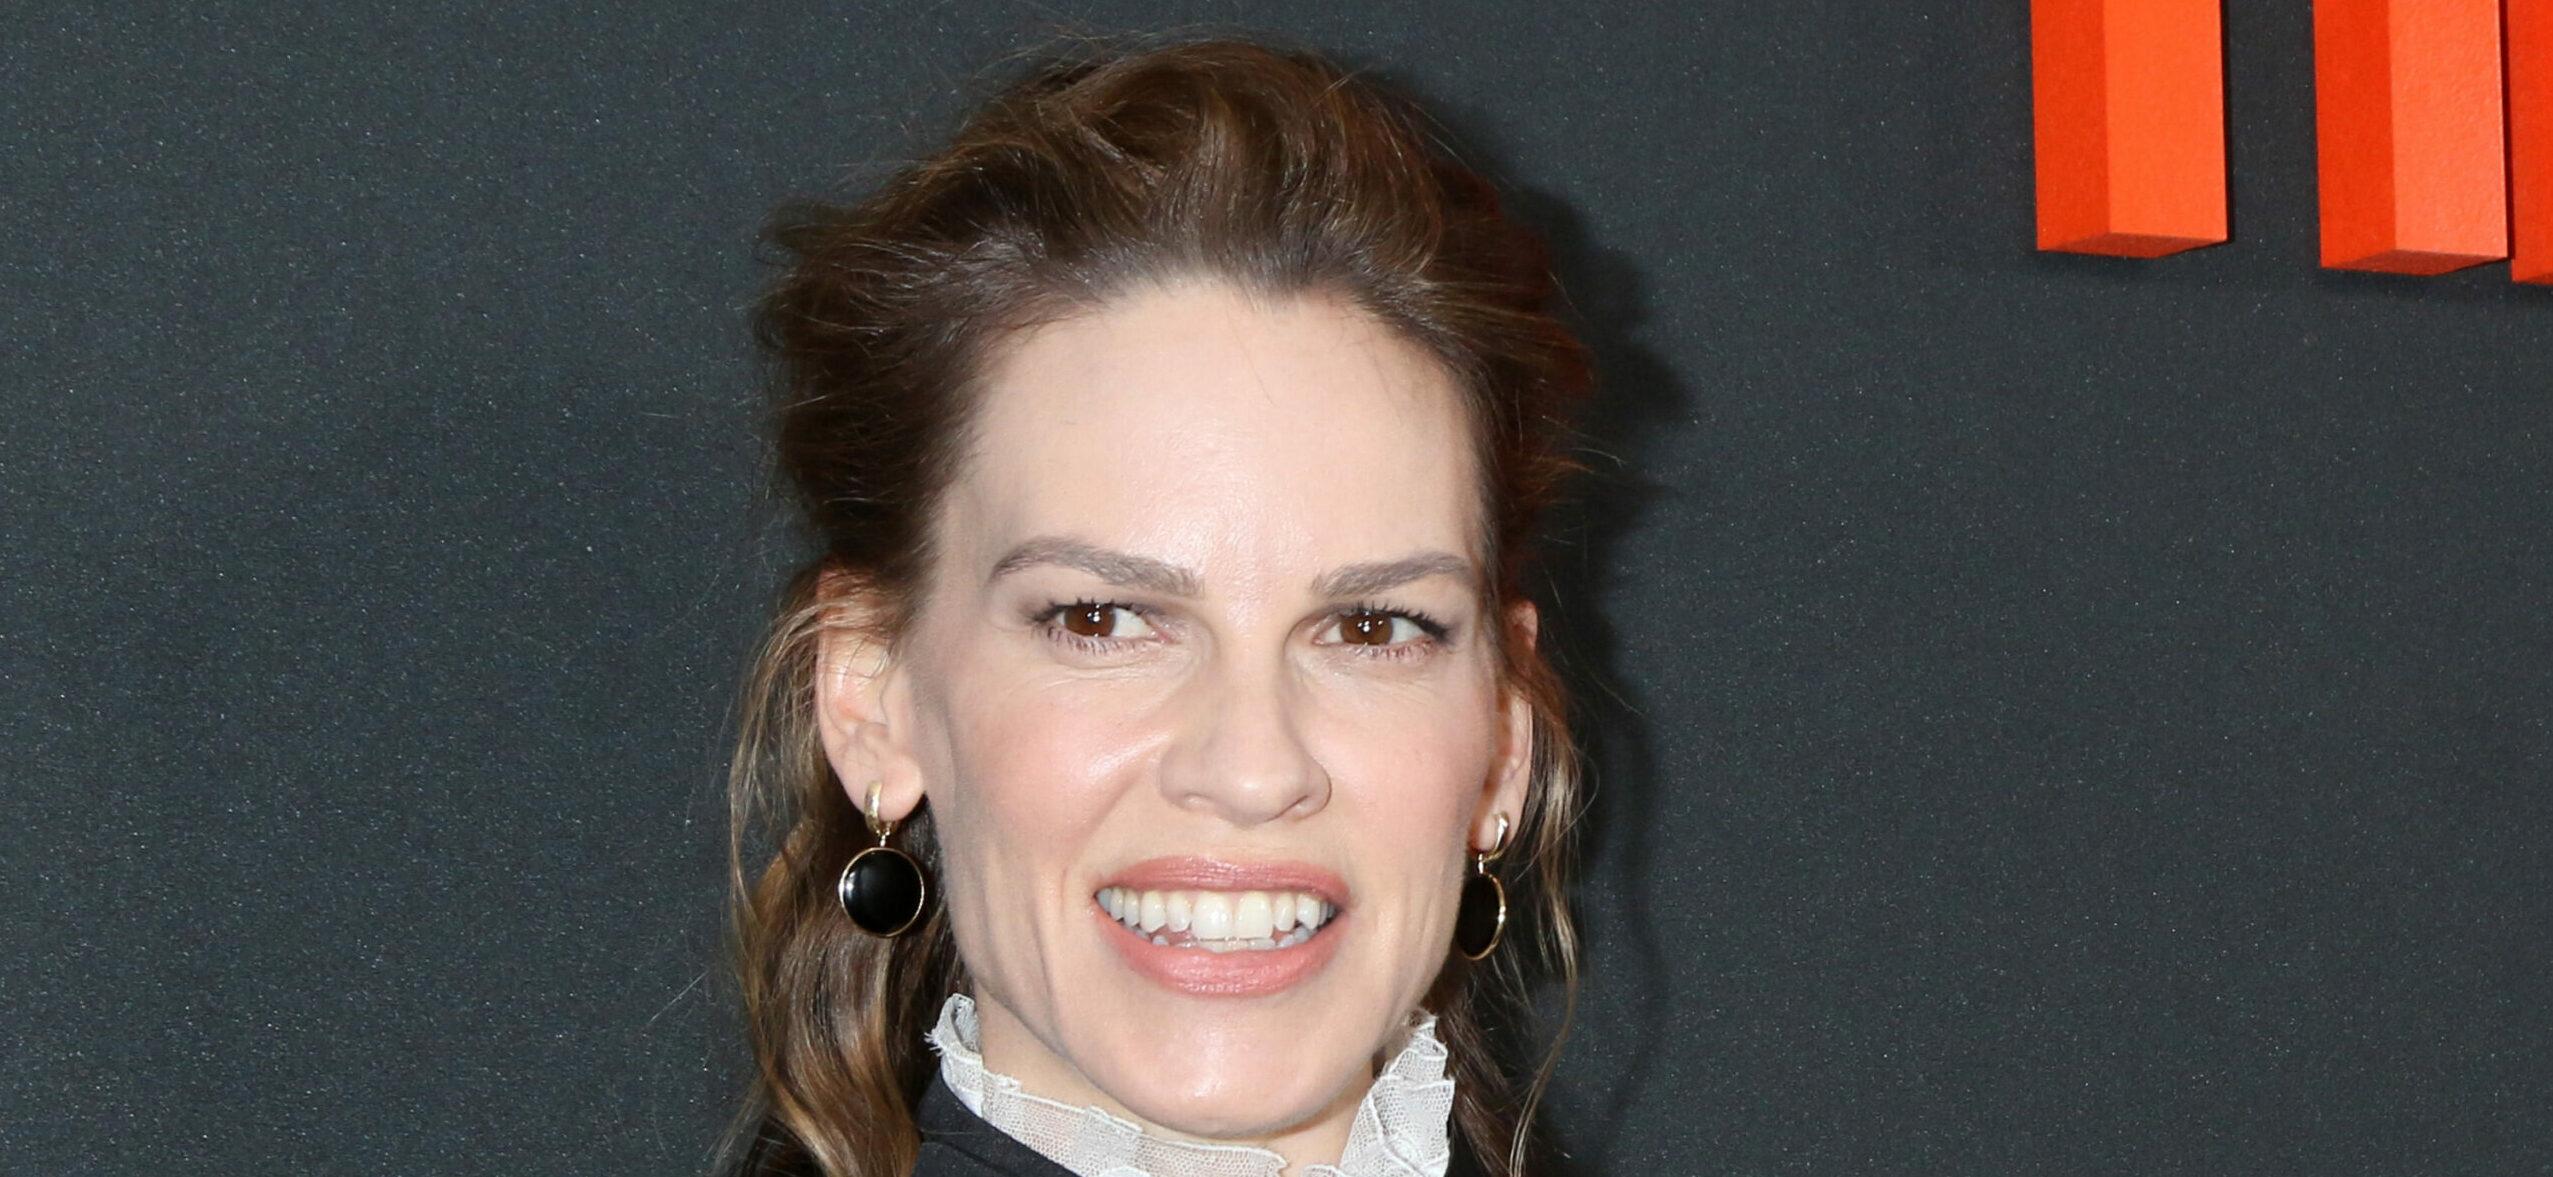 Hilary Swank at "The Hunt" Premiere - Los Angeles